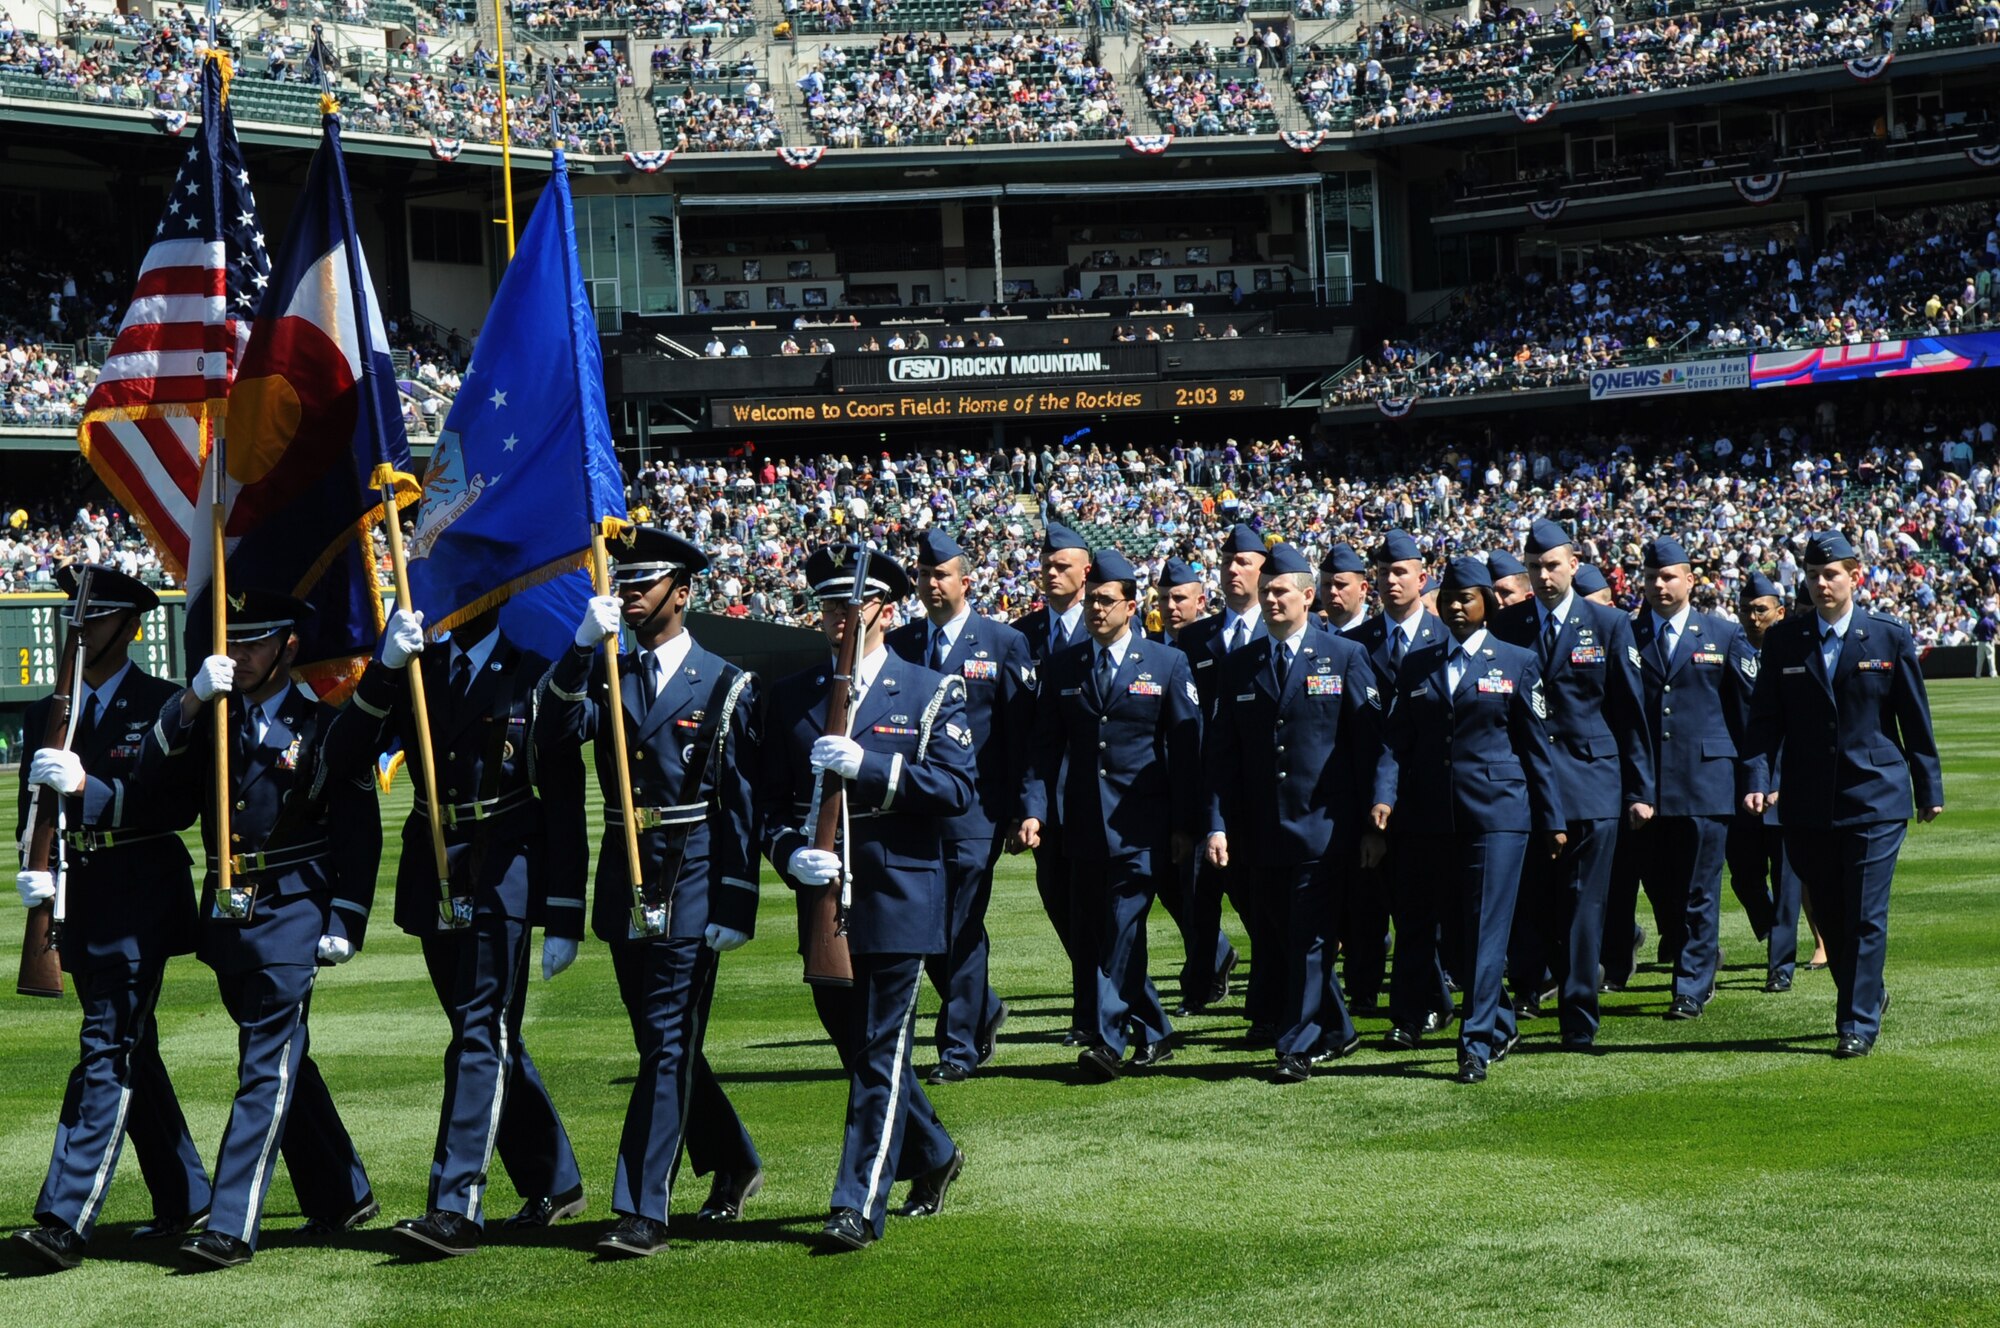 DENVER, Colo. -- Airmen from Colorado recruiting stations, Buckley Air Force Base and Peterson Air Force Base depart Coors Field in front of a 45,509-person crowd April 9. Members from all services performed ceremonial guardsmen duties during the Colorado Rockies Opening Day festivities. (U.S. Air Force photo by Airman 1st Class Marcy Glass)